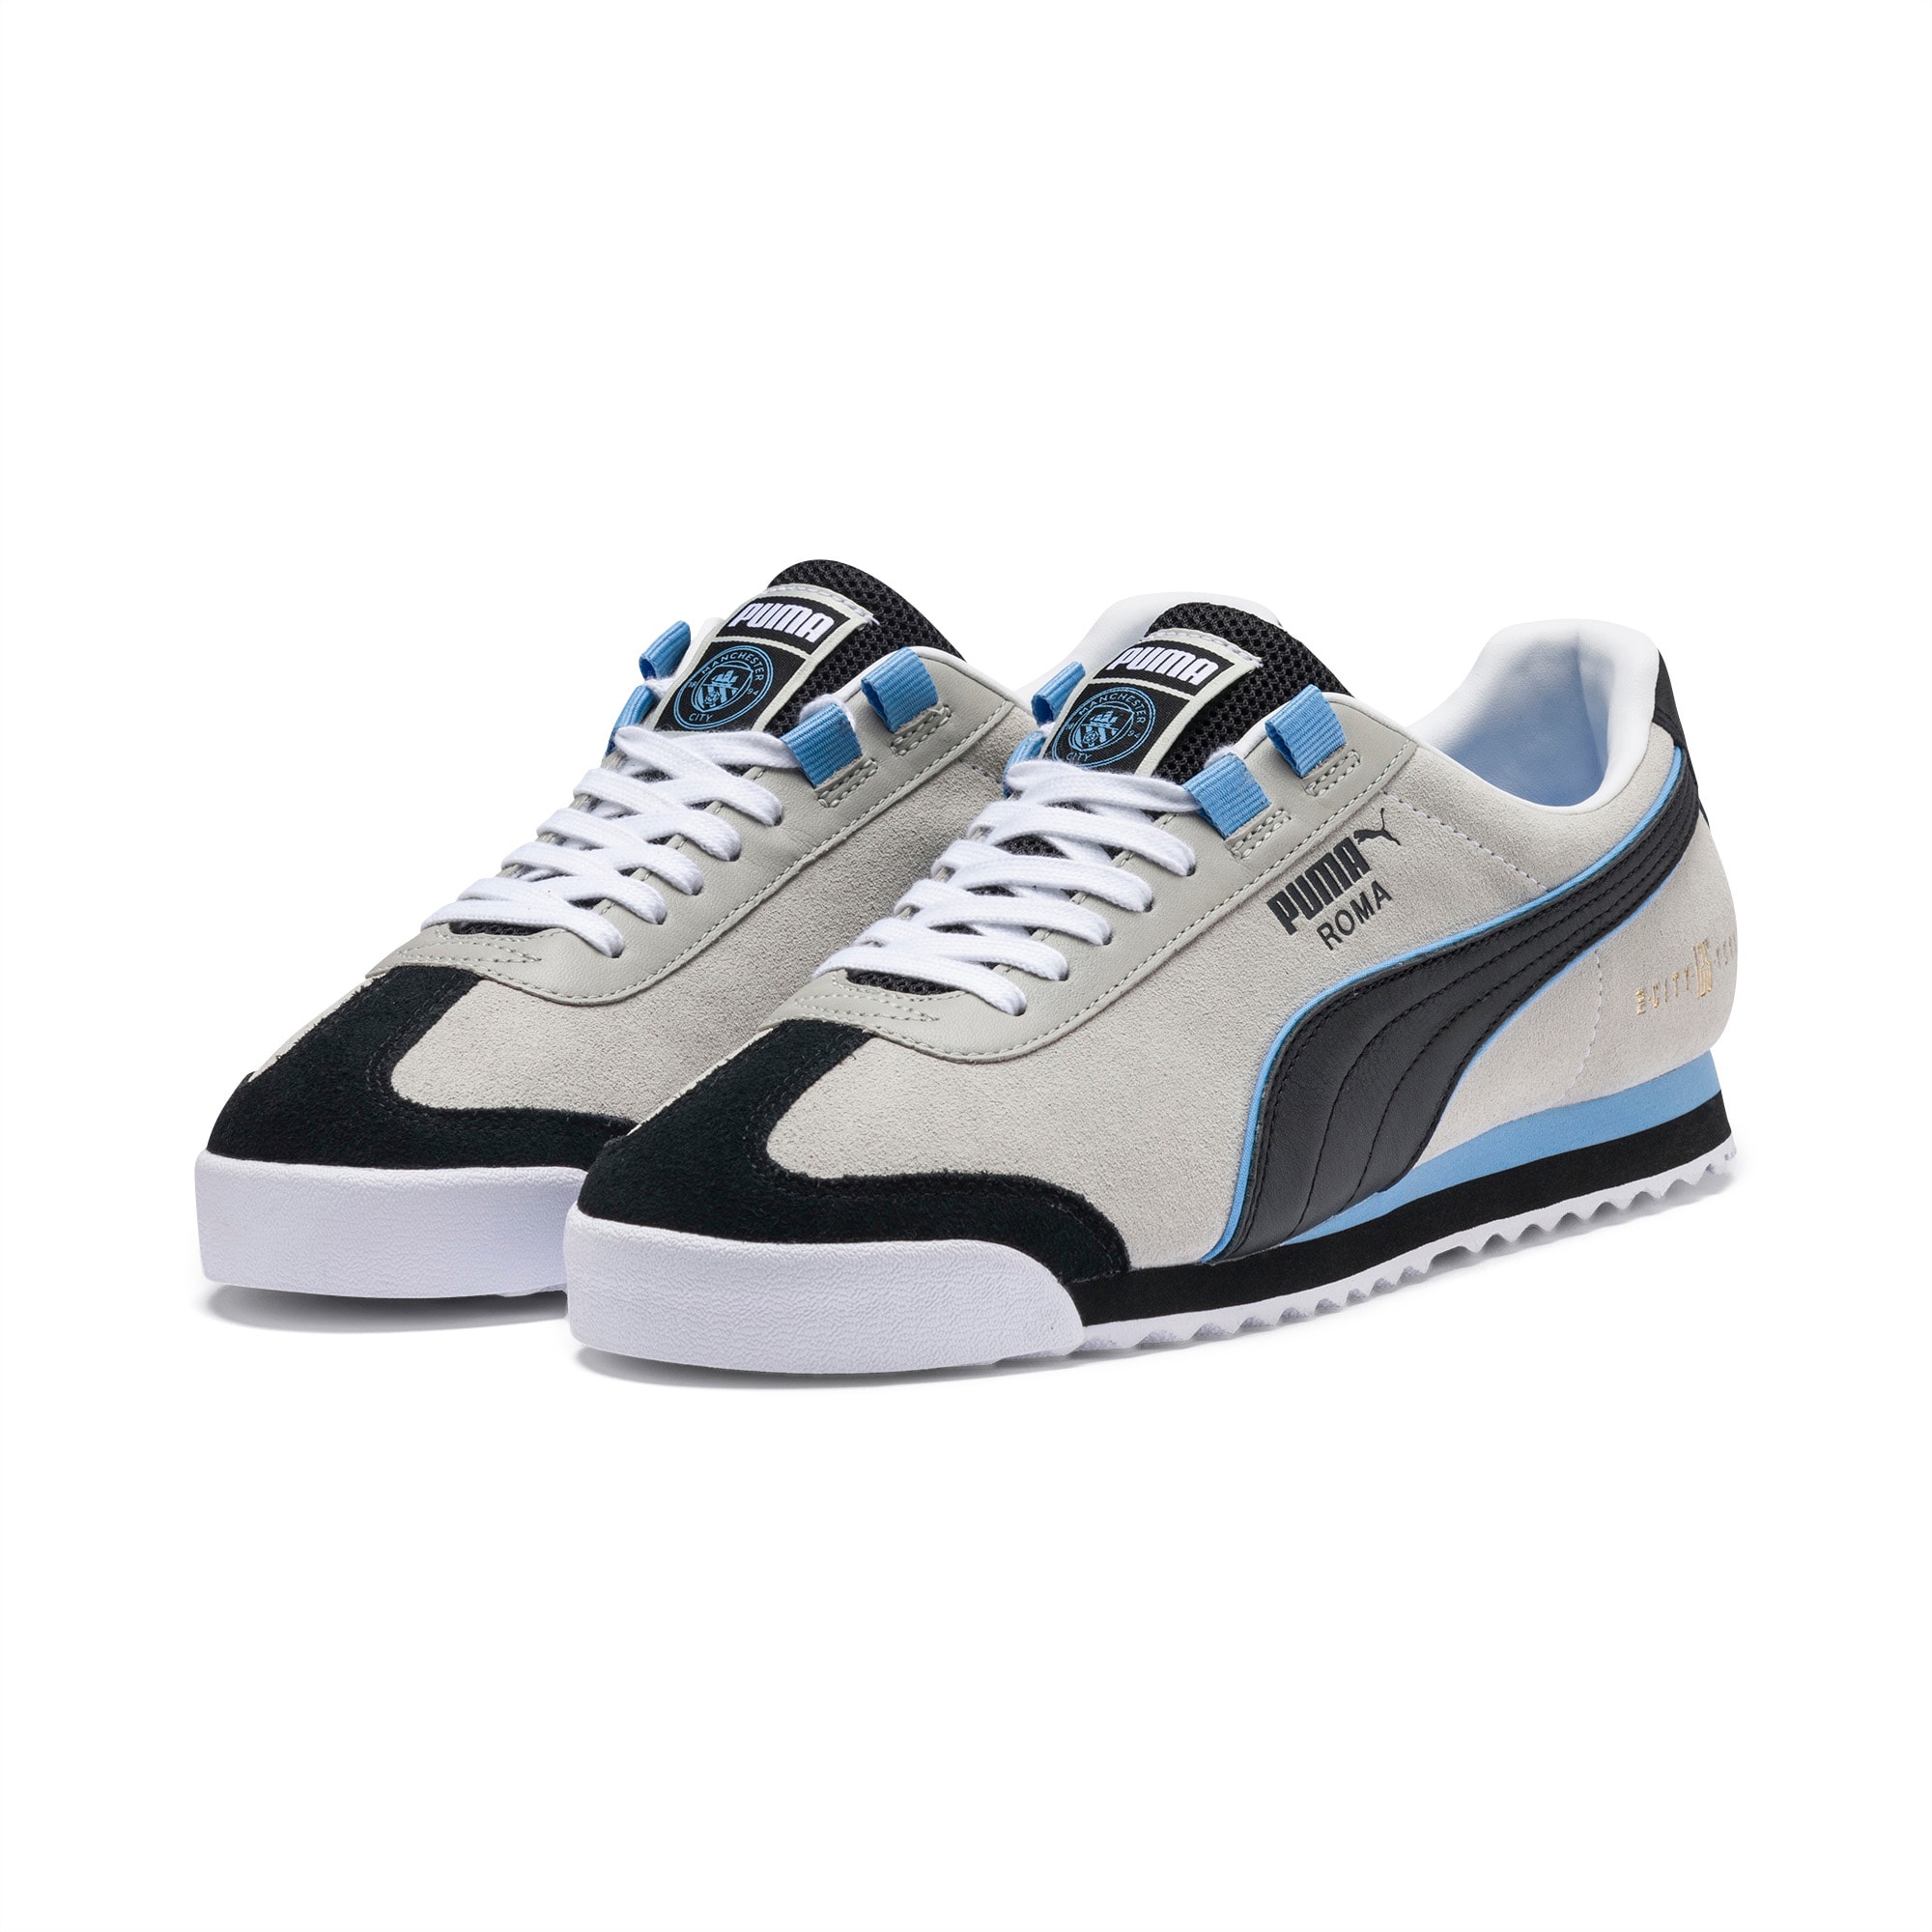 Roma Manchester City Men's Sneakers 